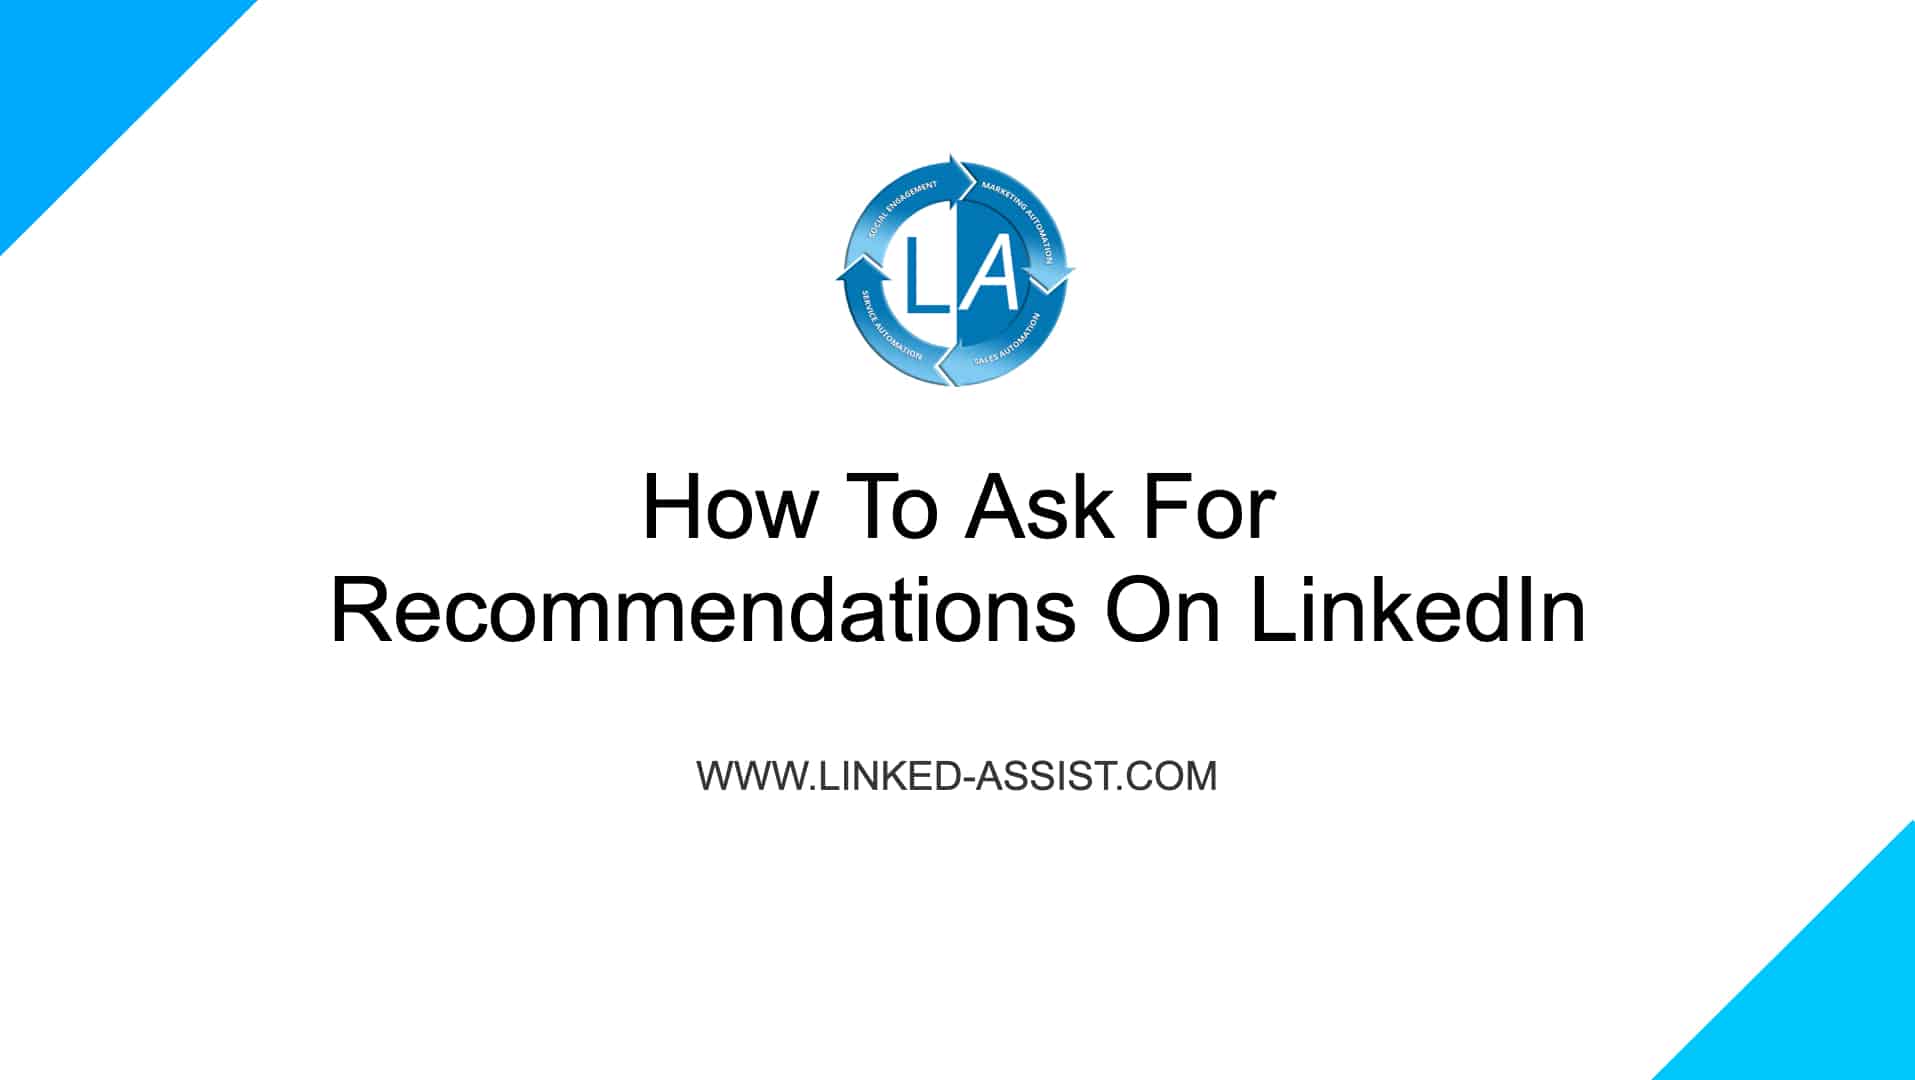 linkedin-recommendations-everything-you-need-to-know-about-linked